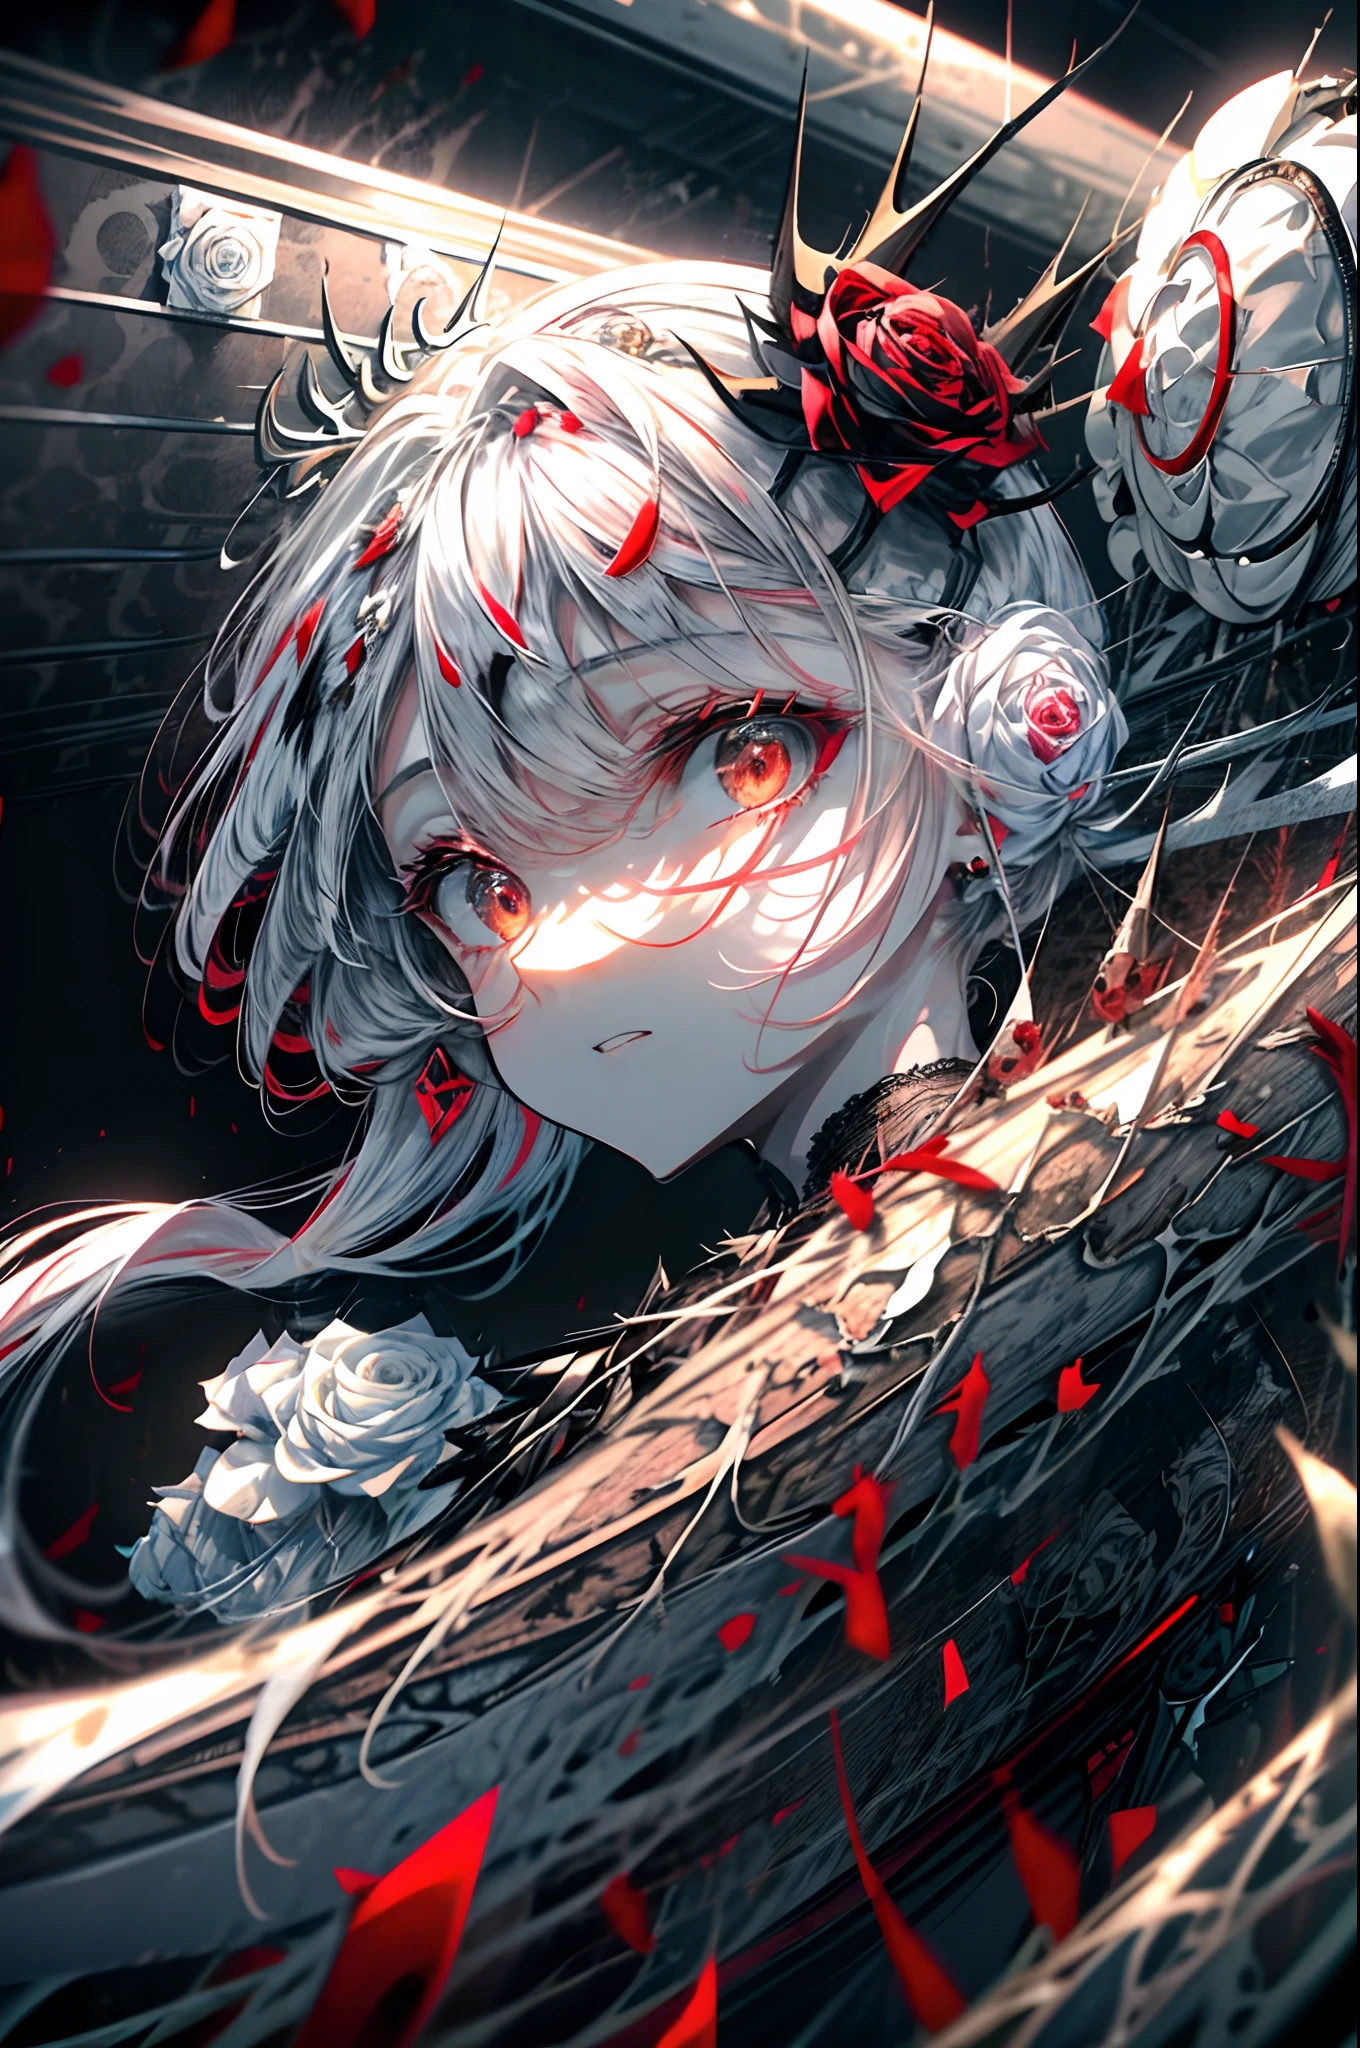 Pale painting style, one girl, long white shaggy, fluffy hair, long bangs between eyes, eyes slightly hidden by bangs, large pale red eyes, staring eyes, red eye shadow, long eyelashes, smile, doll-like white skin, (bright red roses and thorns tangled in hair:1.3), Black gothic dress, (beautiful black lace:1.3), dark background, (lots of red roses in bloom:1.5), super high quality, super detail, super detailed image, close-up of face,